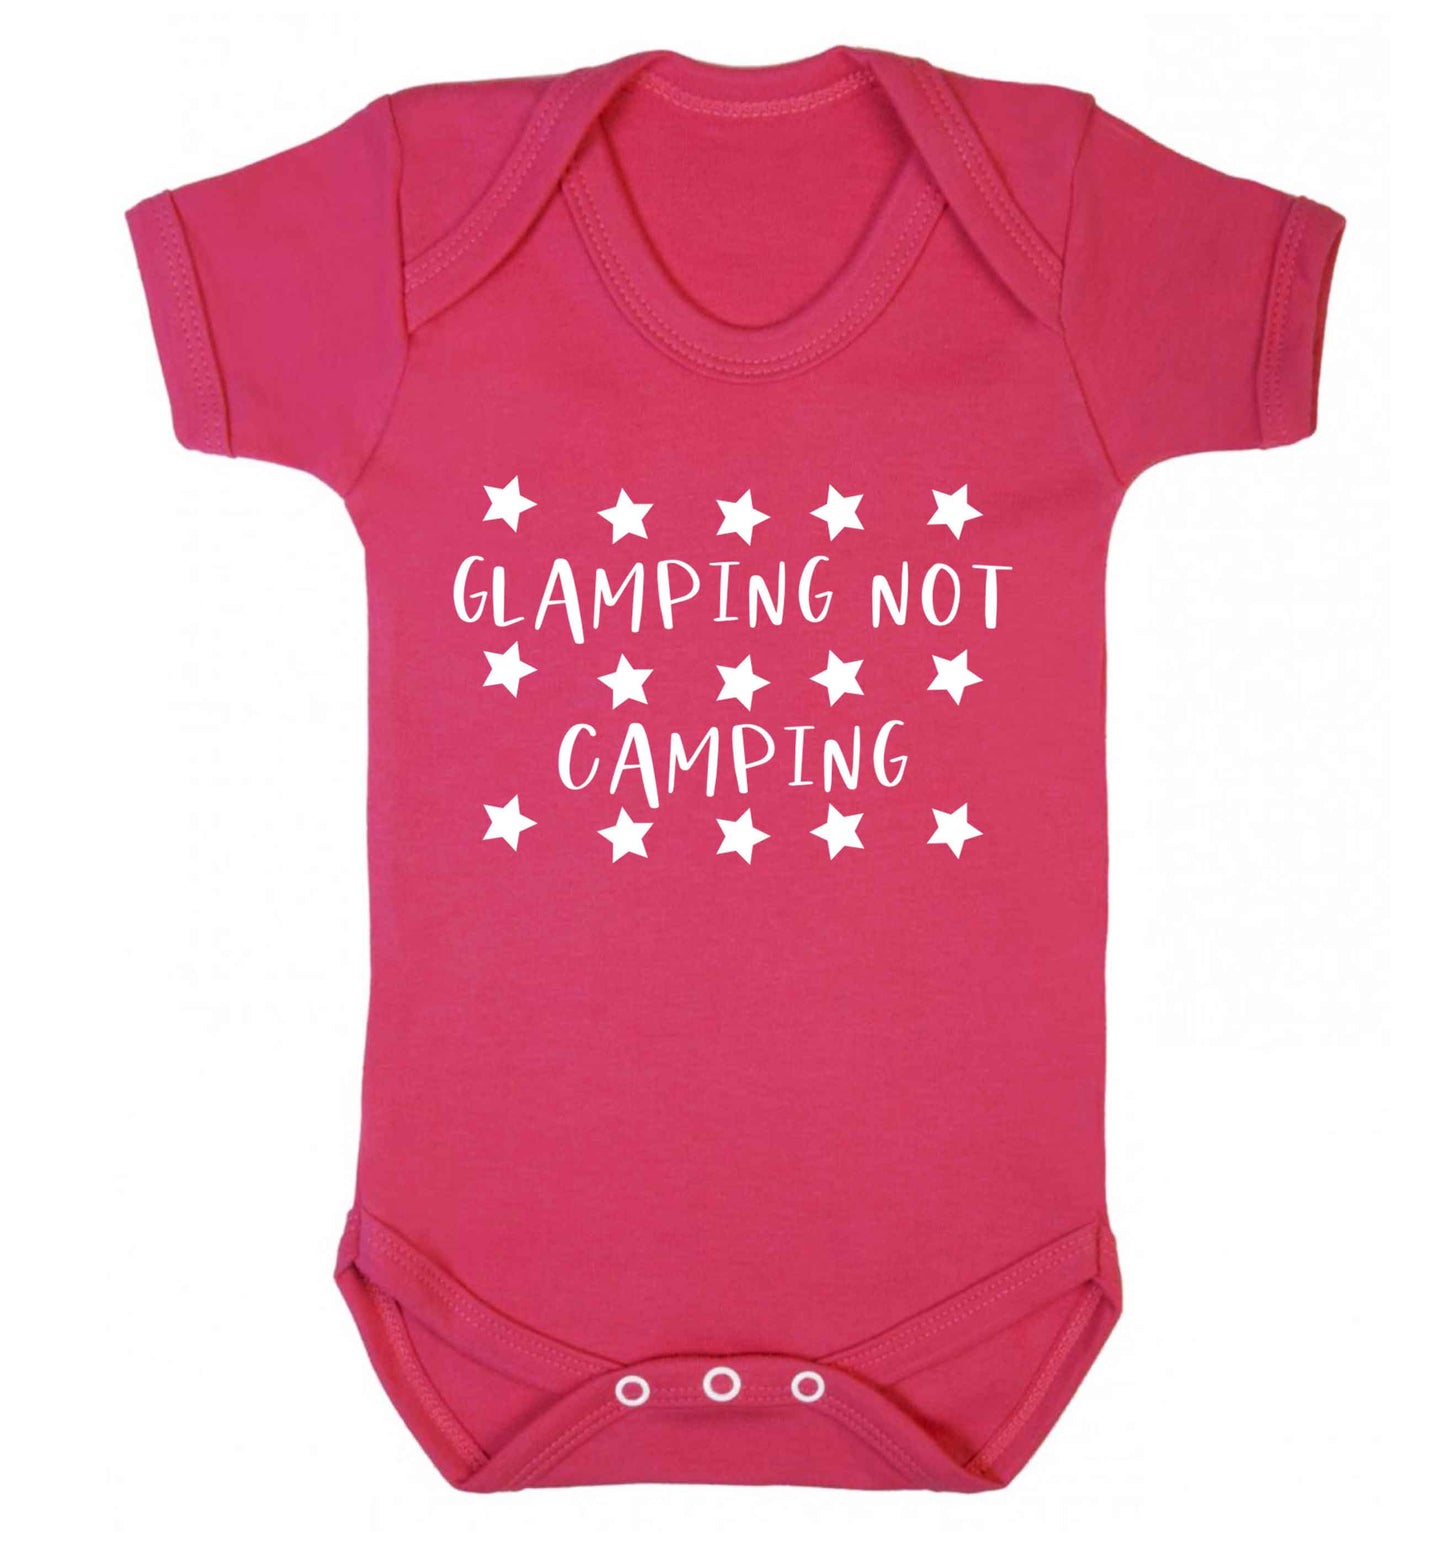 Glamping not camping Baby Vest dark pink 18-24 months